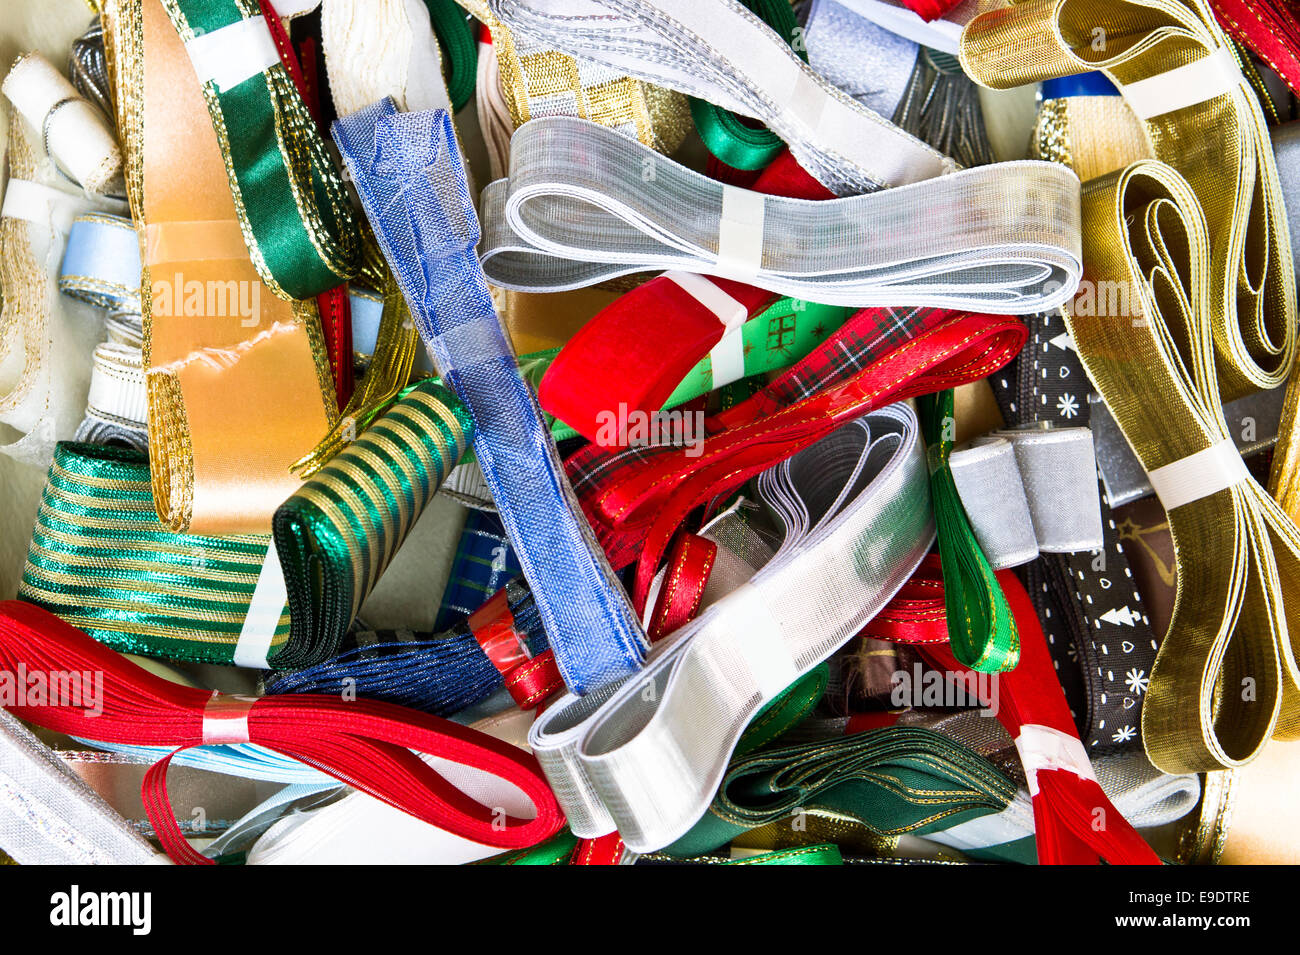 Selection of ribbons as a background image Stock Photo